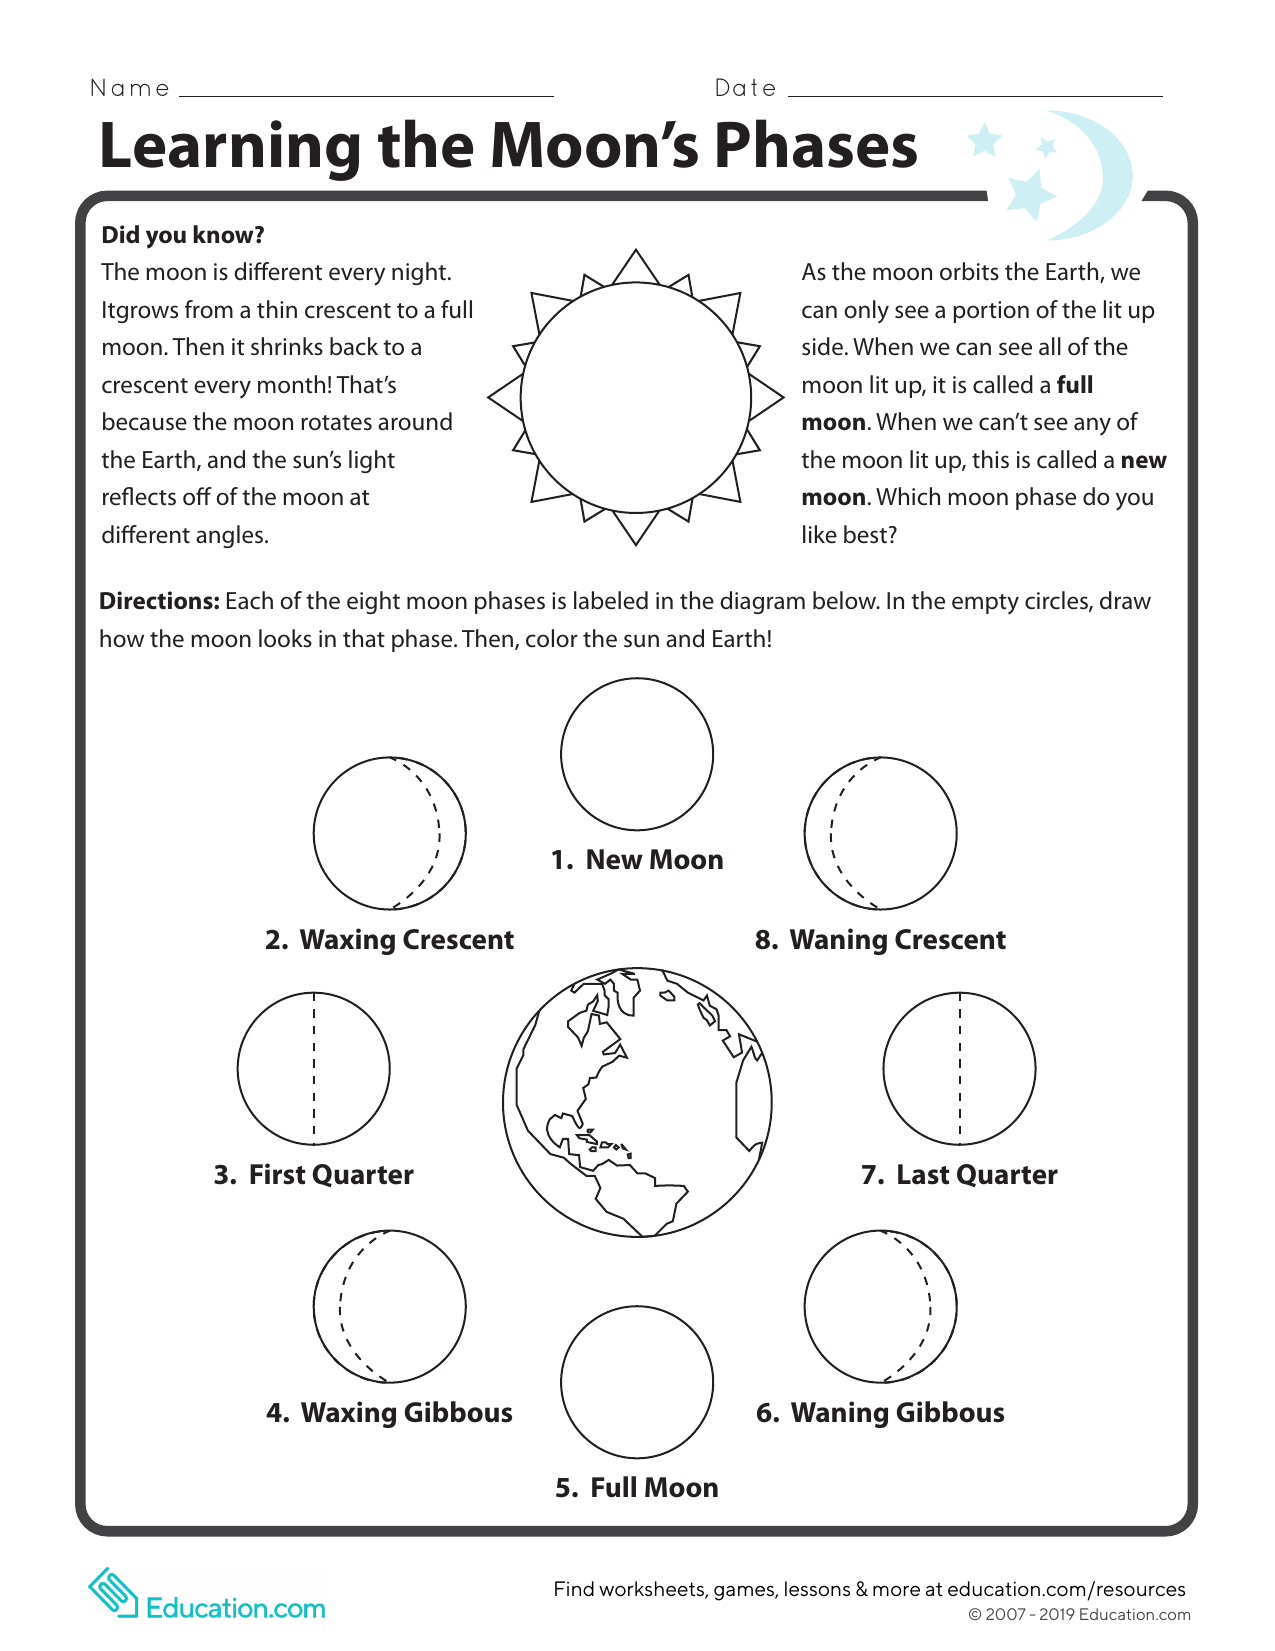 learning-moon-phases With Moon Phases Worksheet Pdf